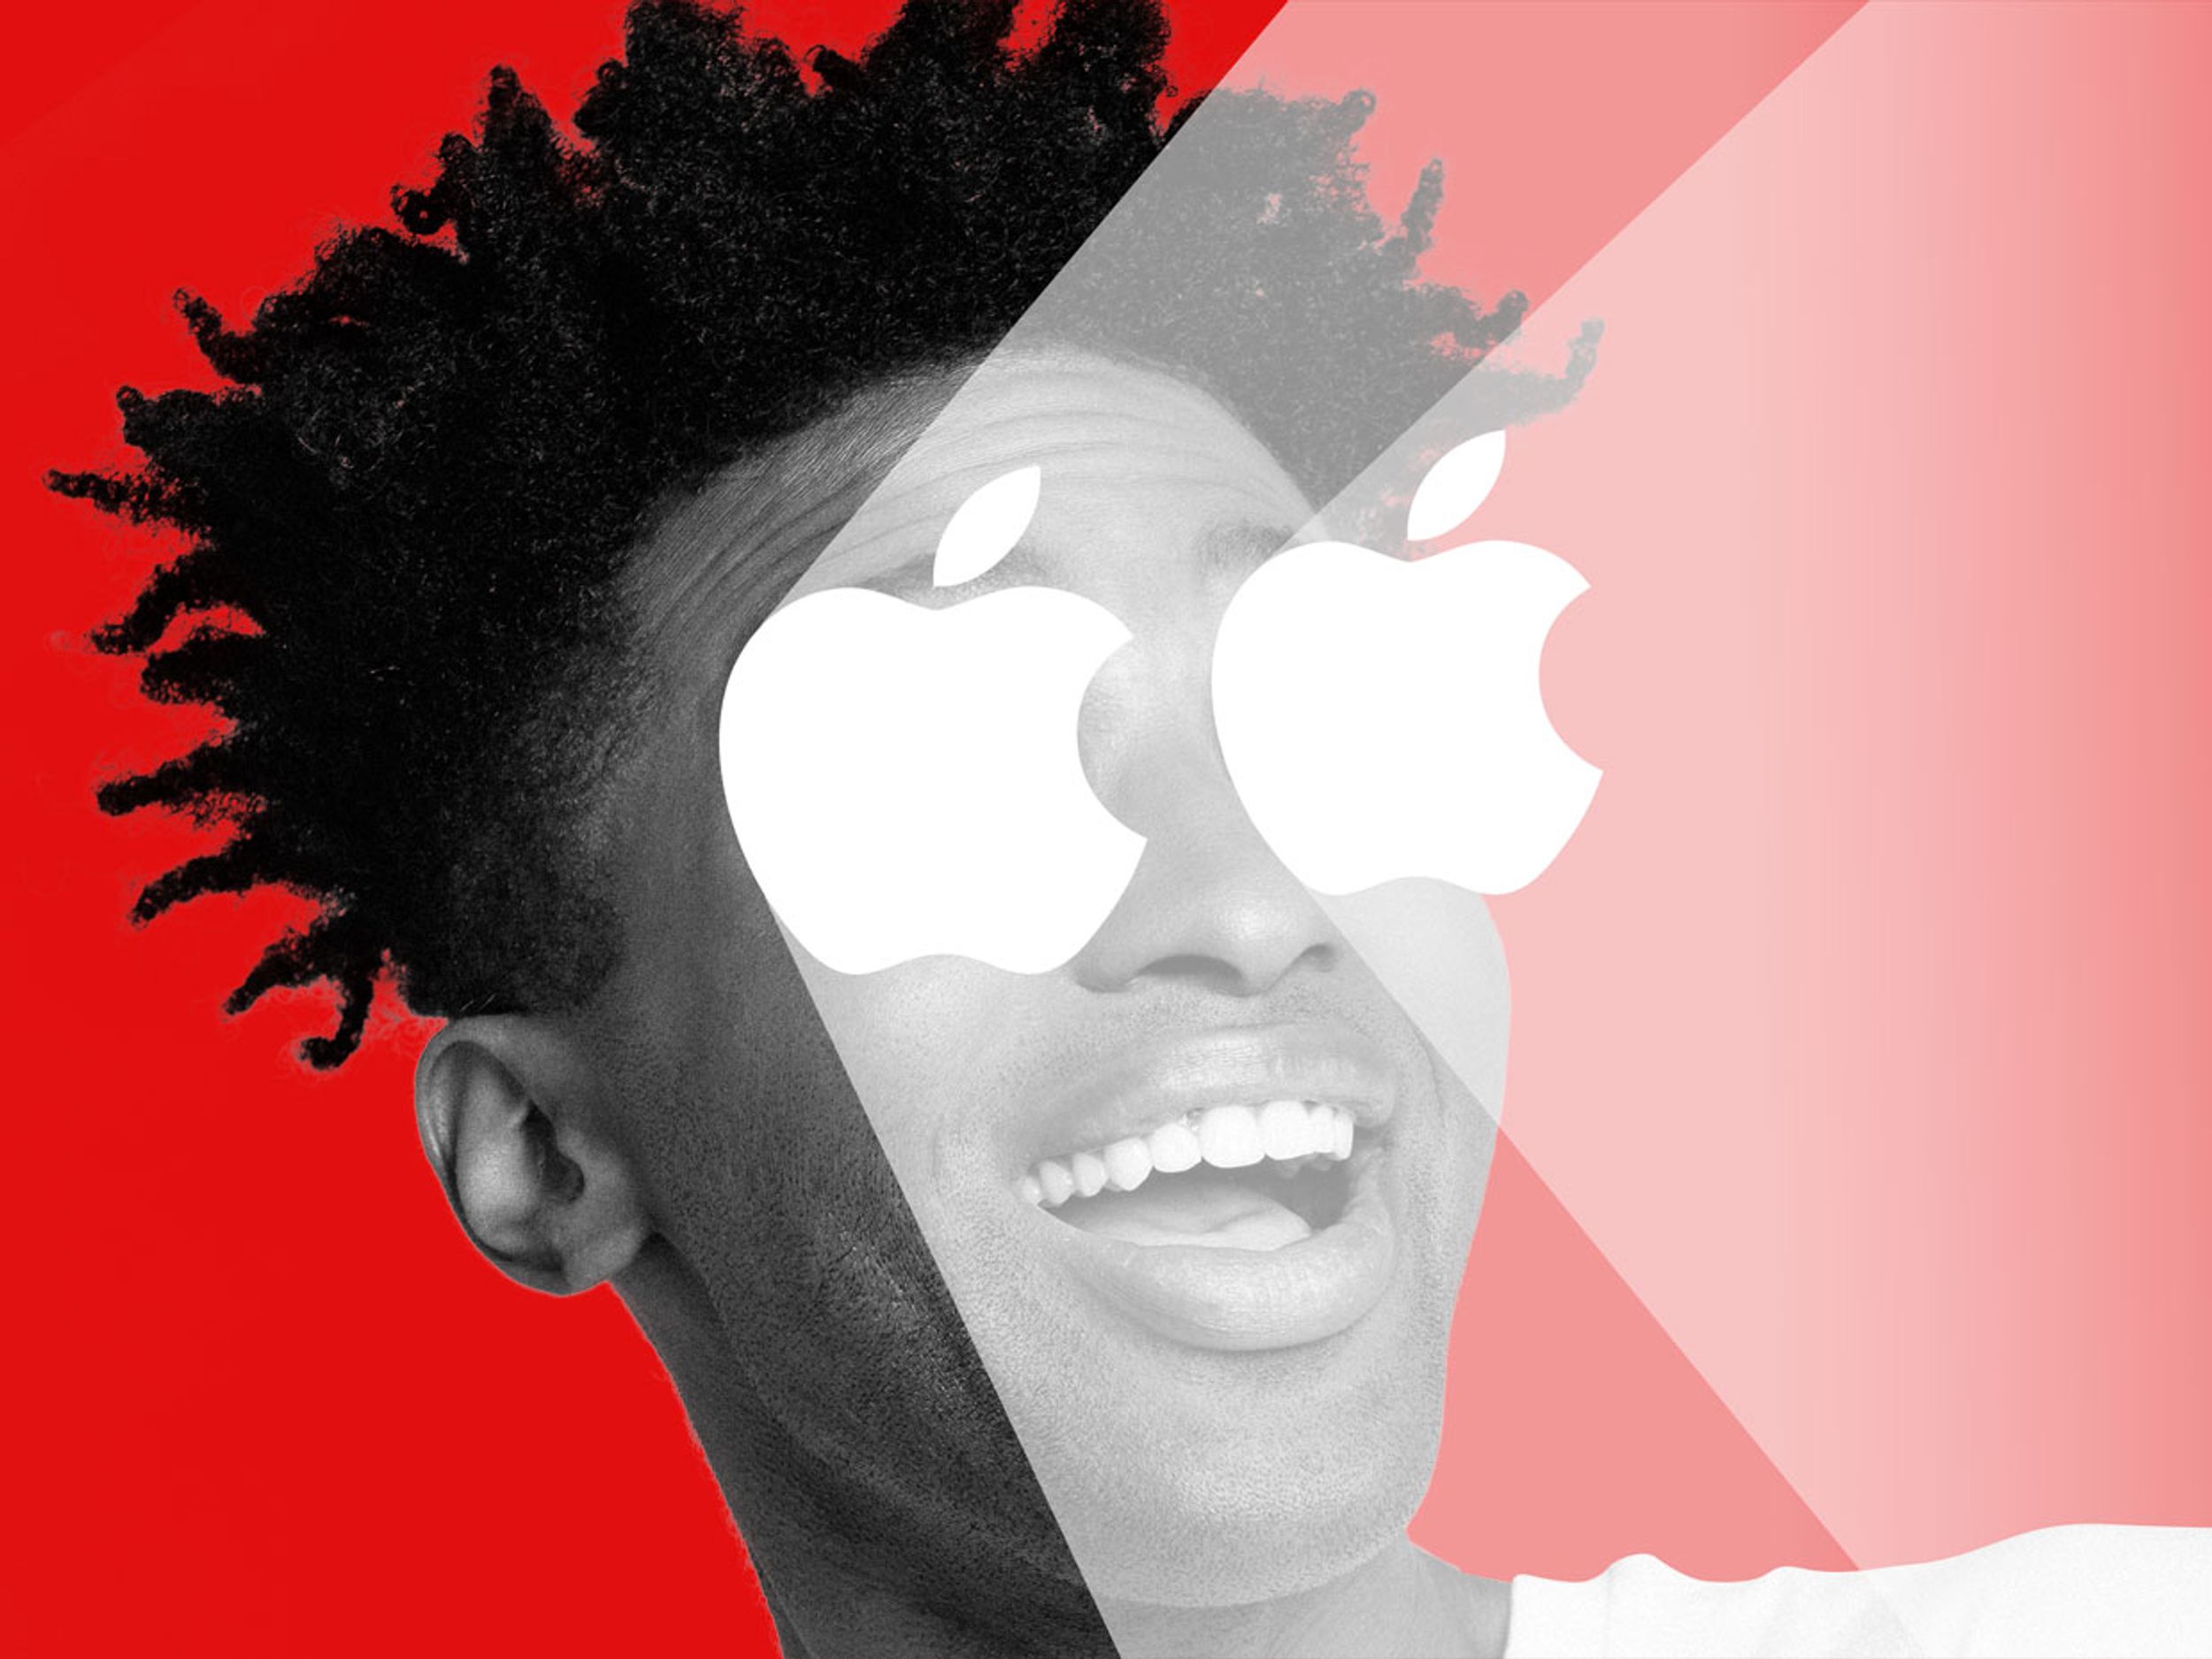 Illustration of a man with apple icon shining.